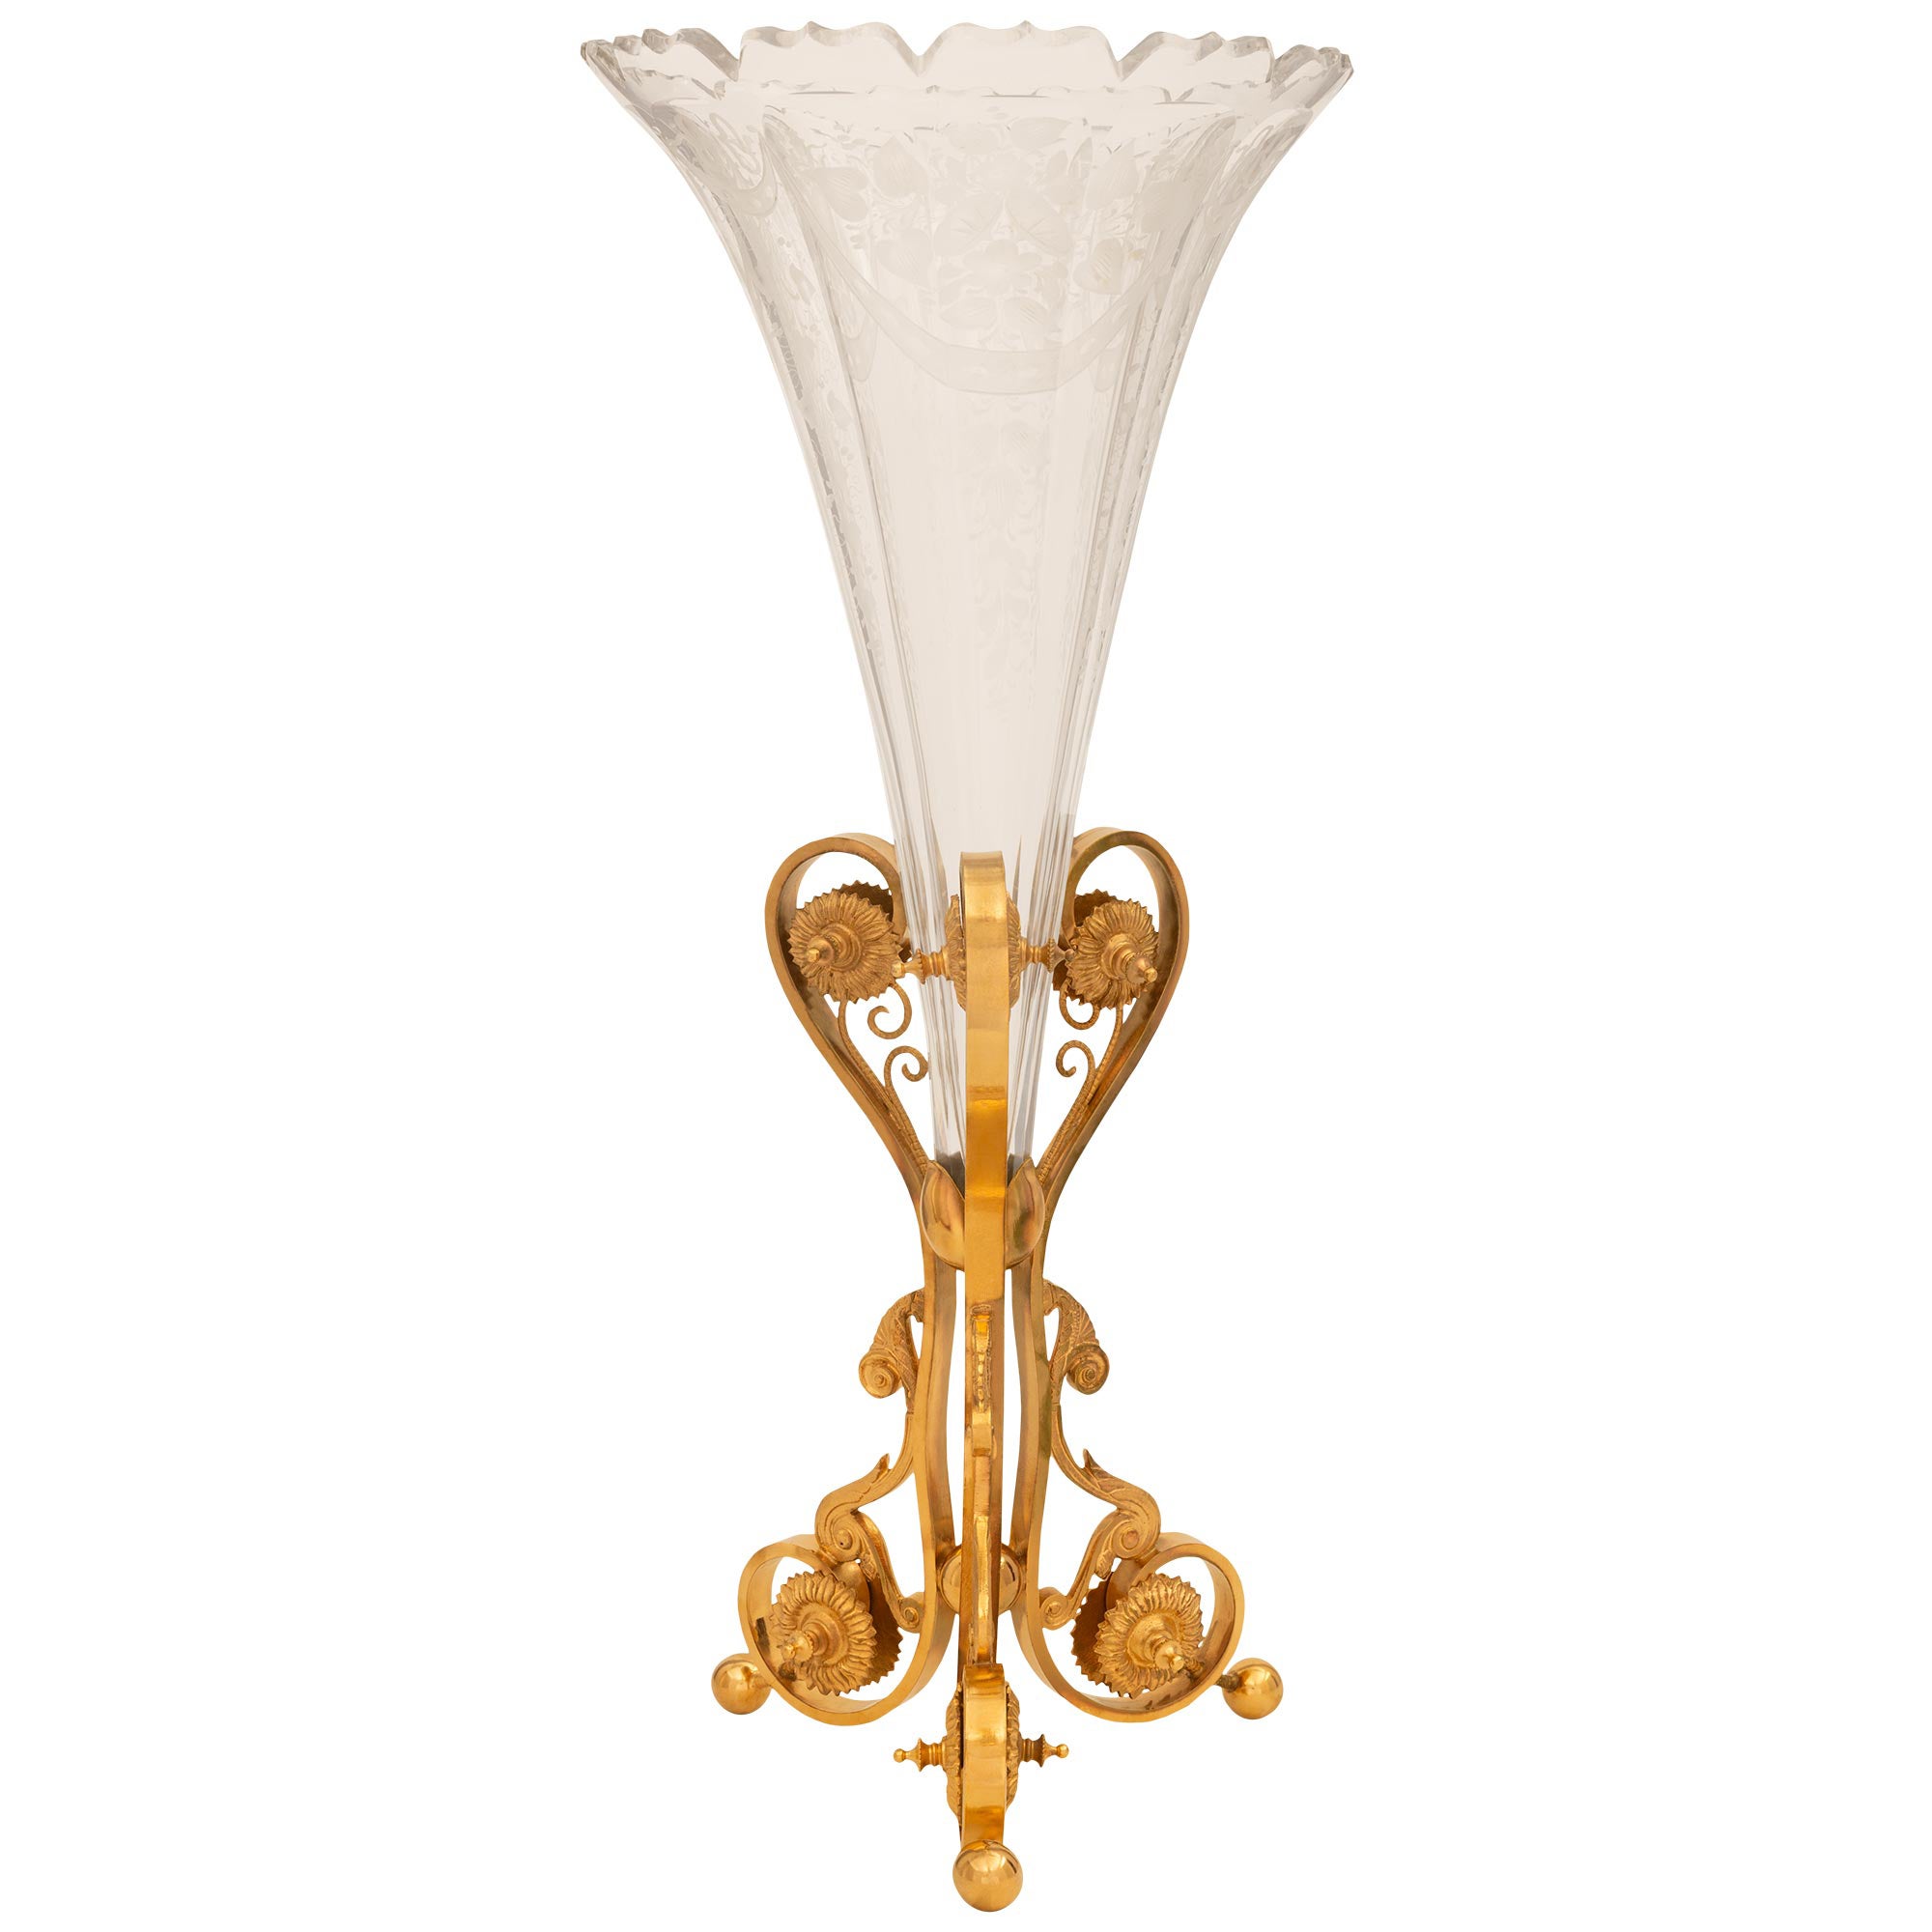 French Turn Of The Century Louis XVI St. Baccarat Crystal & Ormolu Mounted Vase For Sale